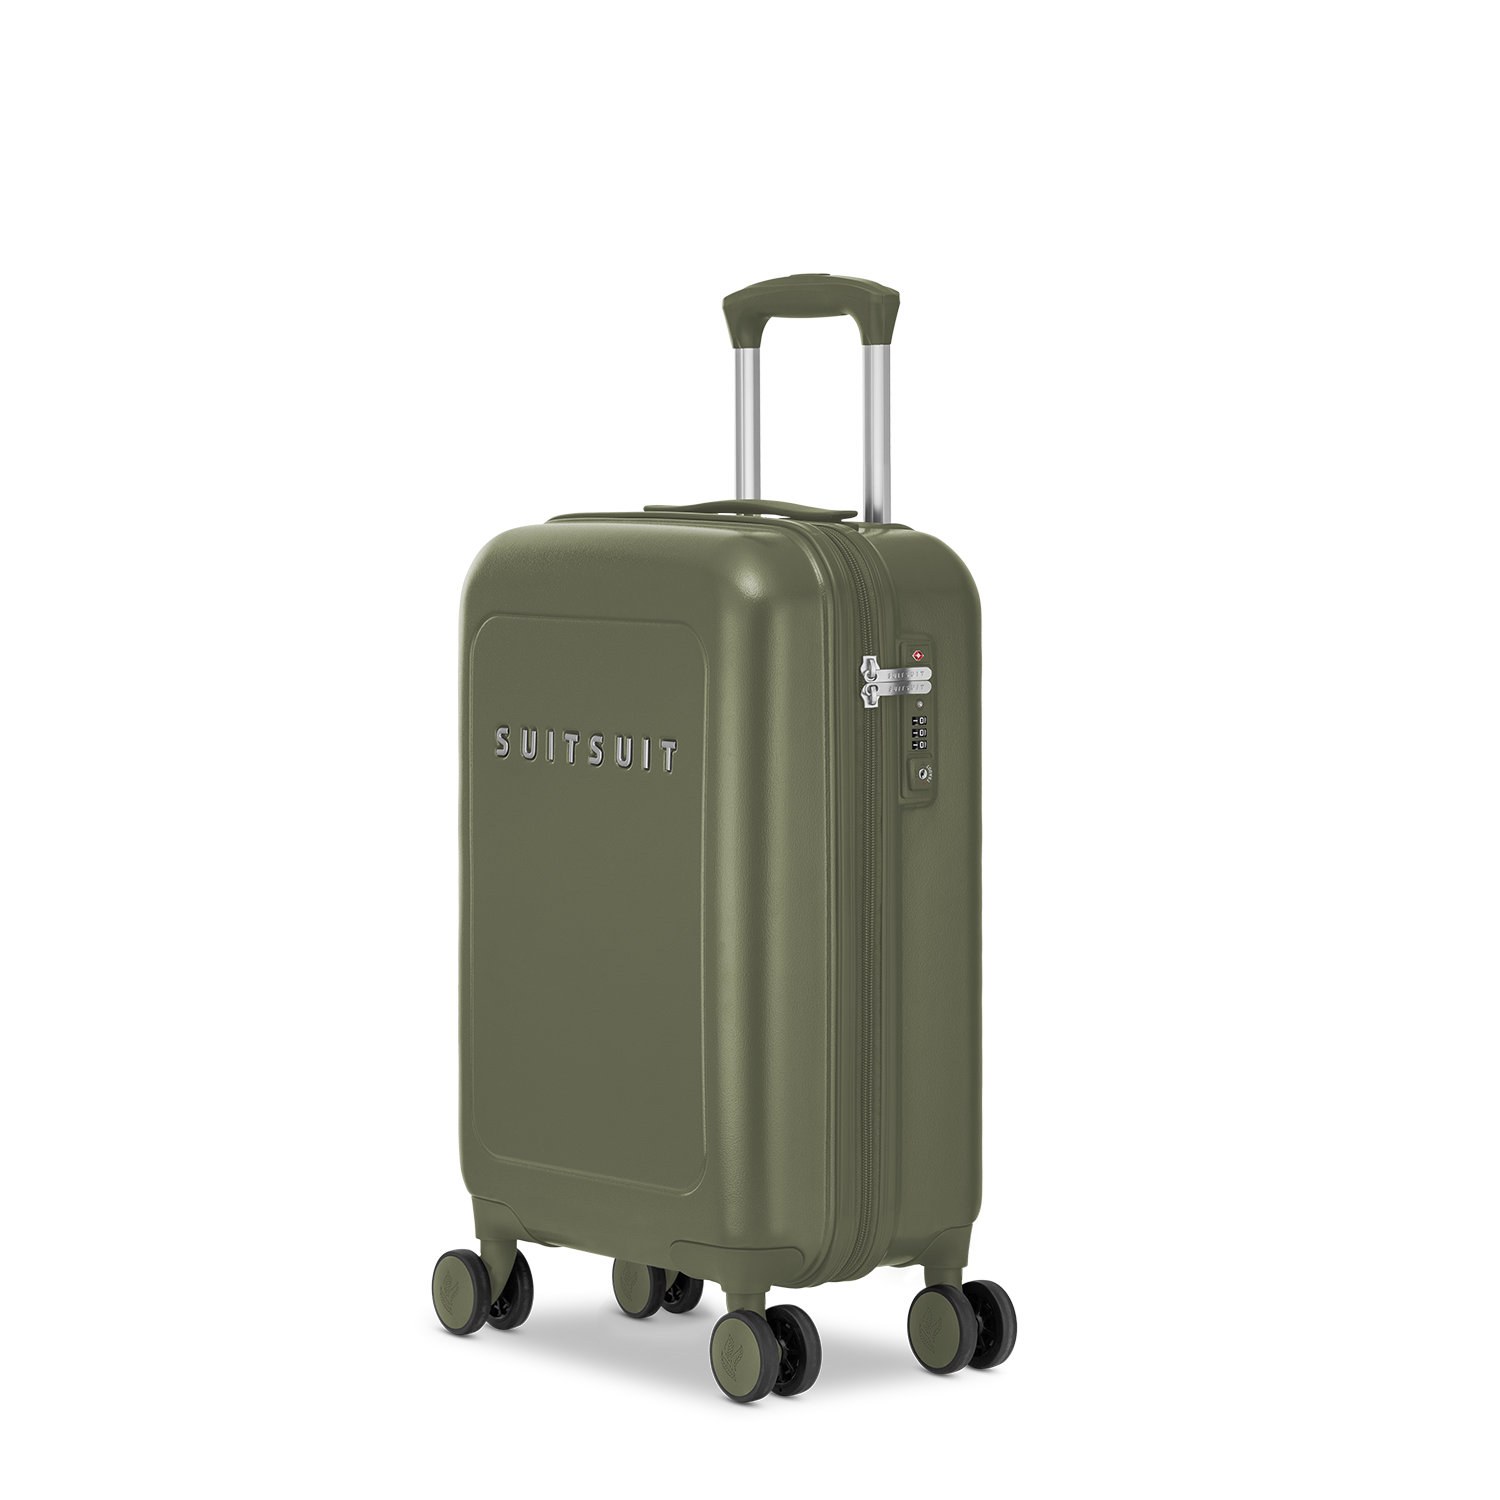 Natura - Dark Olive - Carry-on (20 inch)